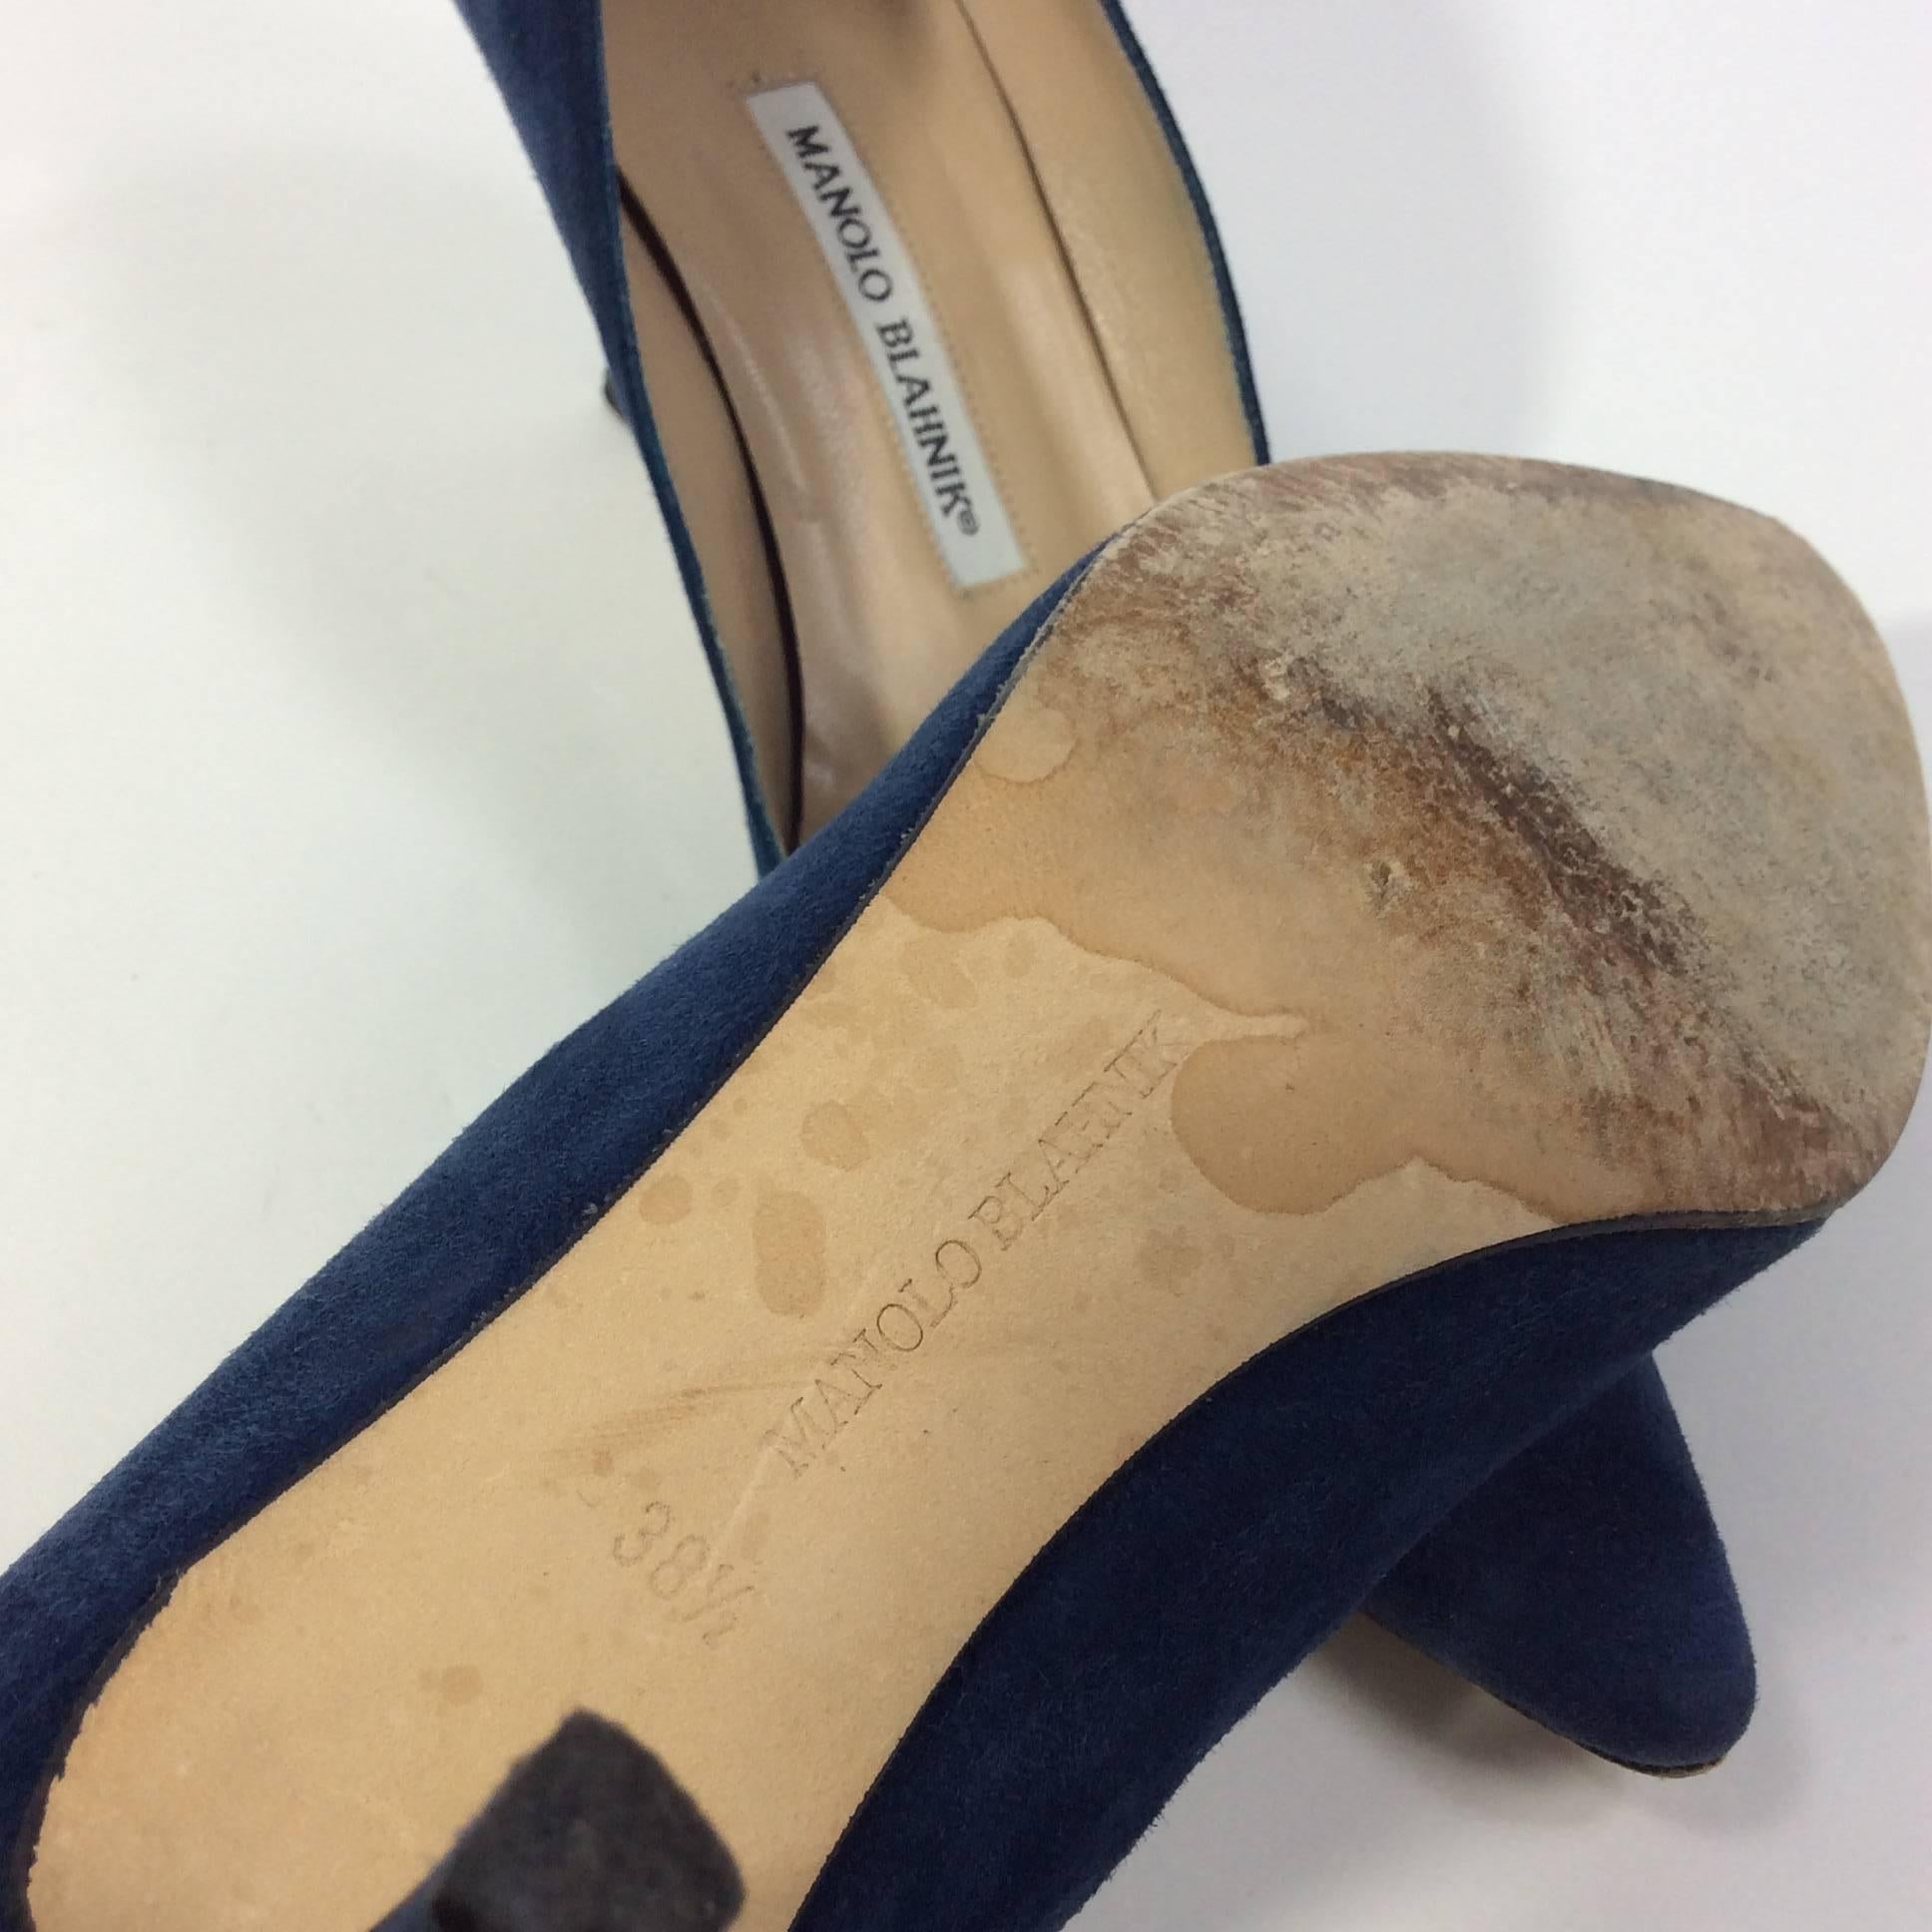 Blue Suede Pointed Toe Pumps
3 inch heels
3 inch sole width
Decorative scalloped rectangle on toe
Size 38.5 (equates to US 8.5)
Leather sole, suede upper, leather lining